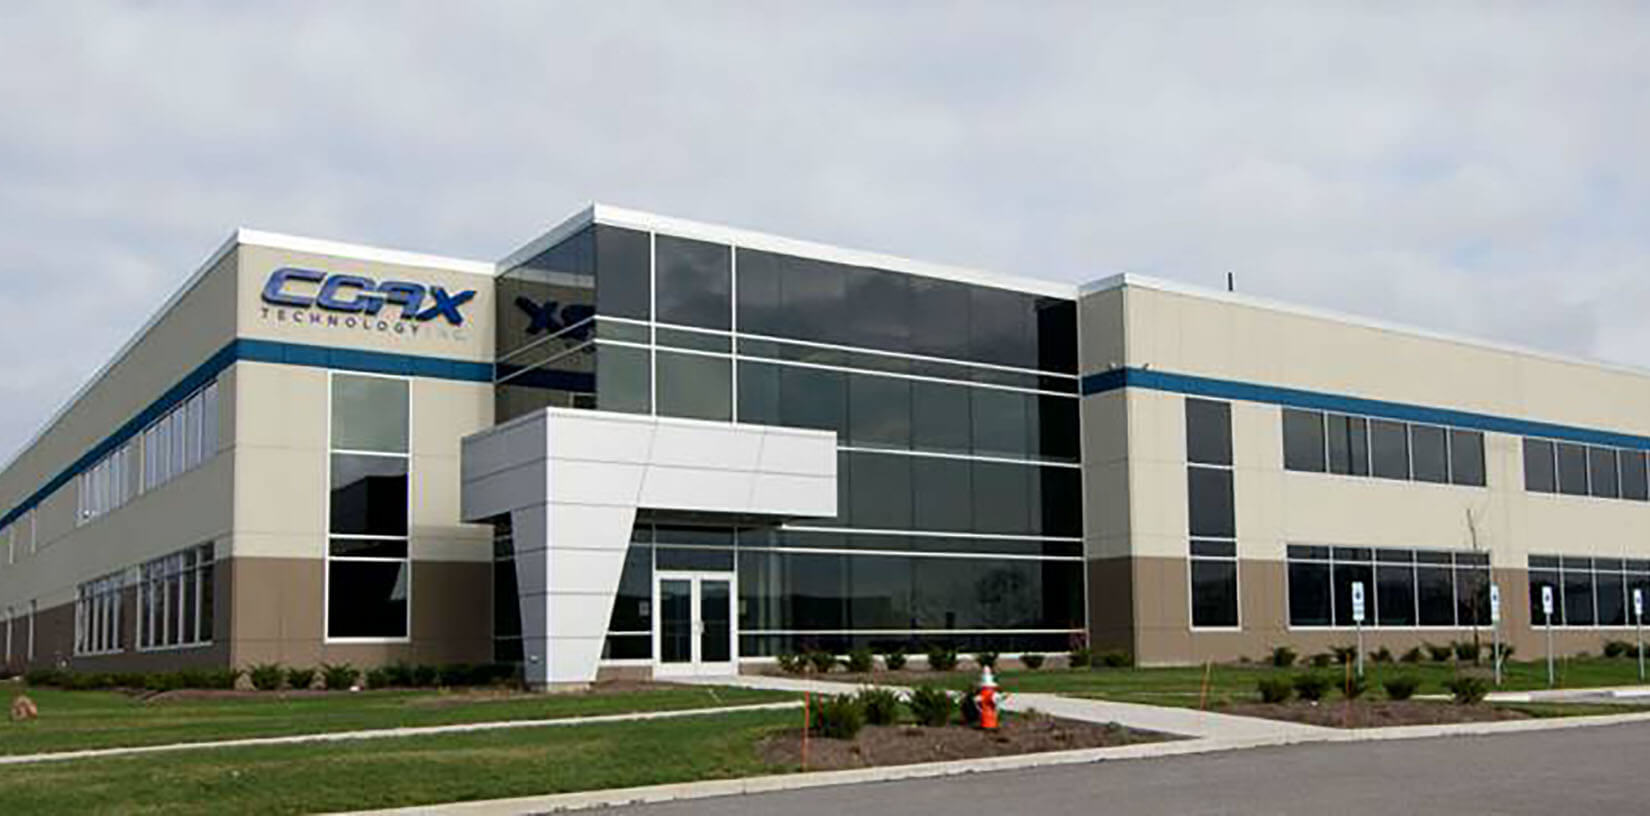 Photograph of CO-AX Technology's headquarters, where we develop our transportation electronics solutions